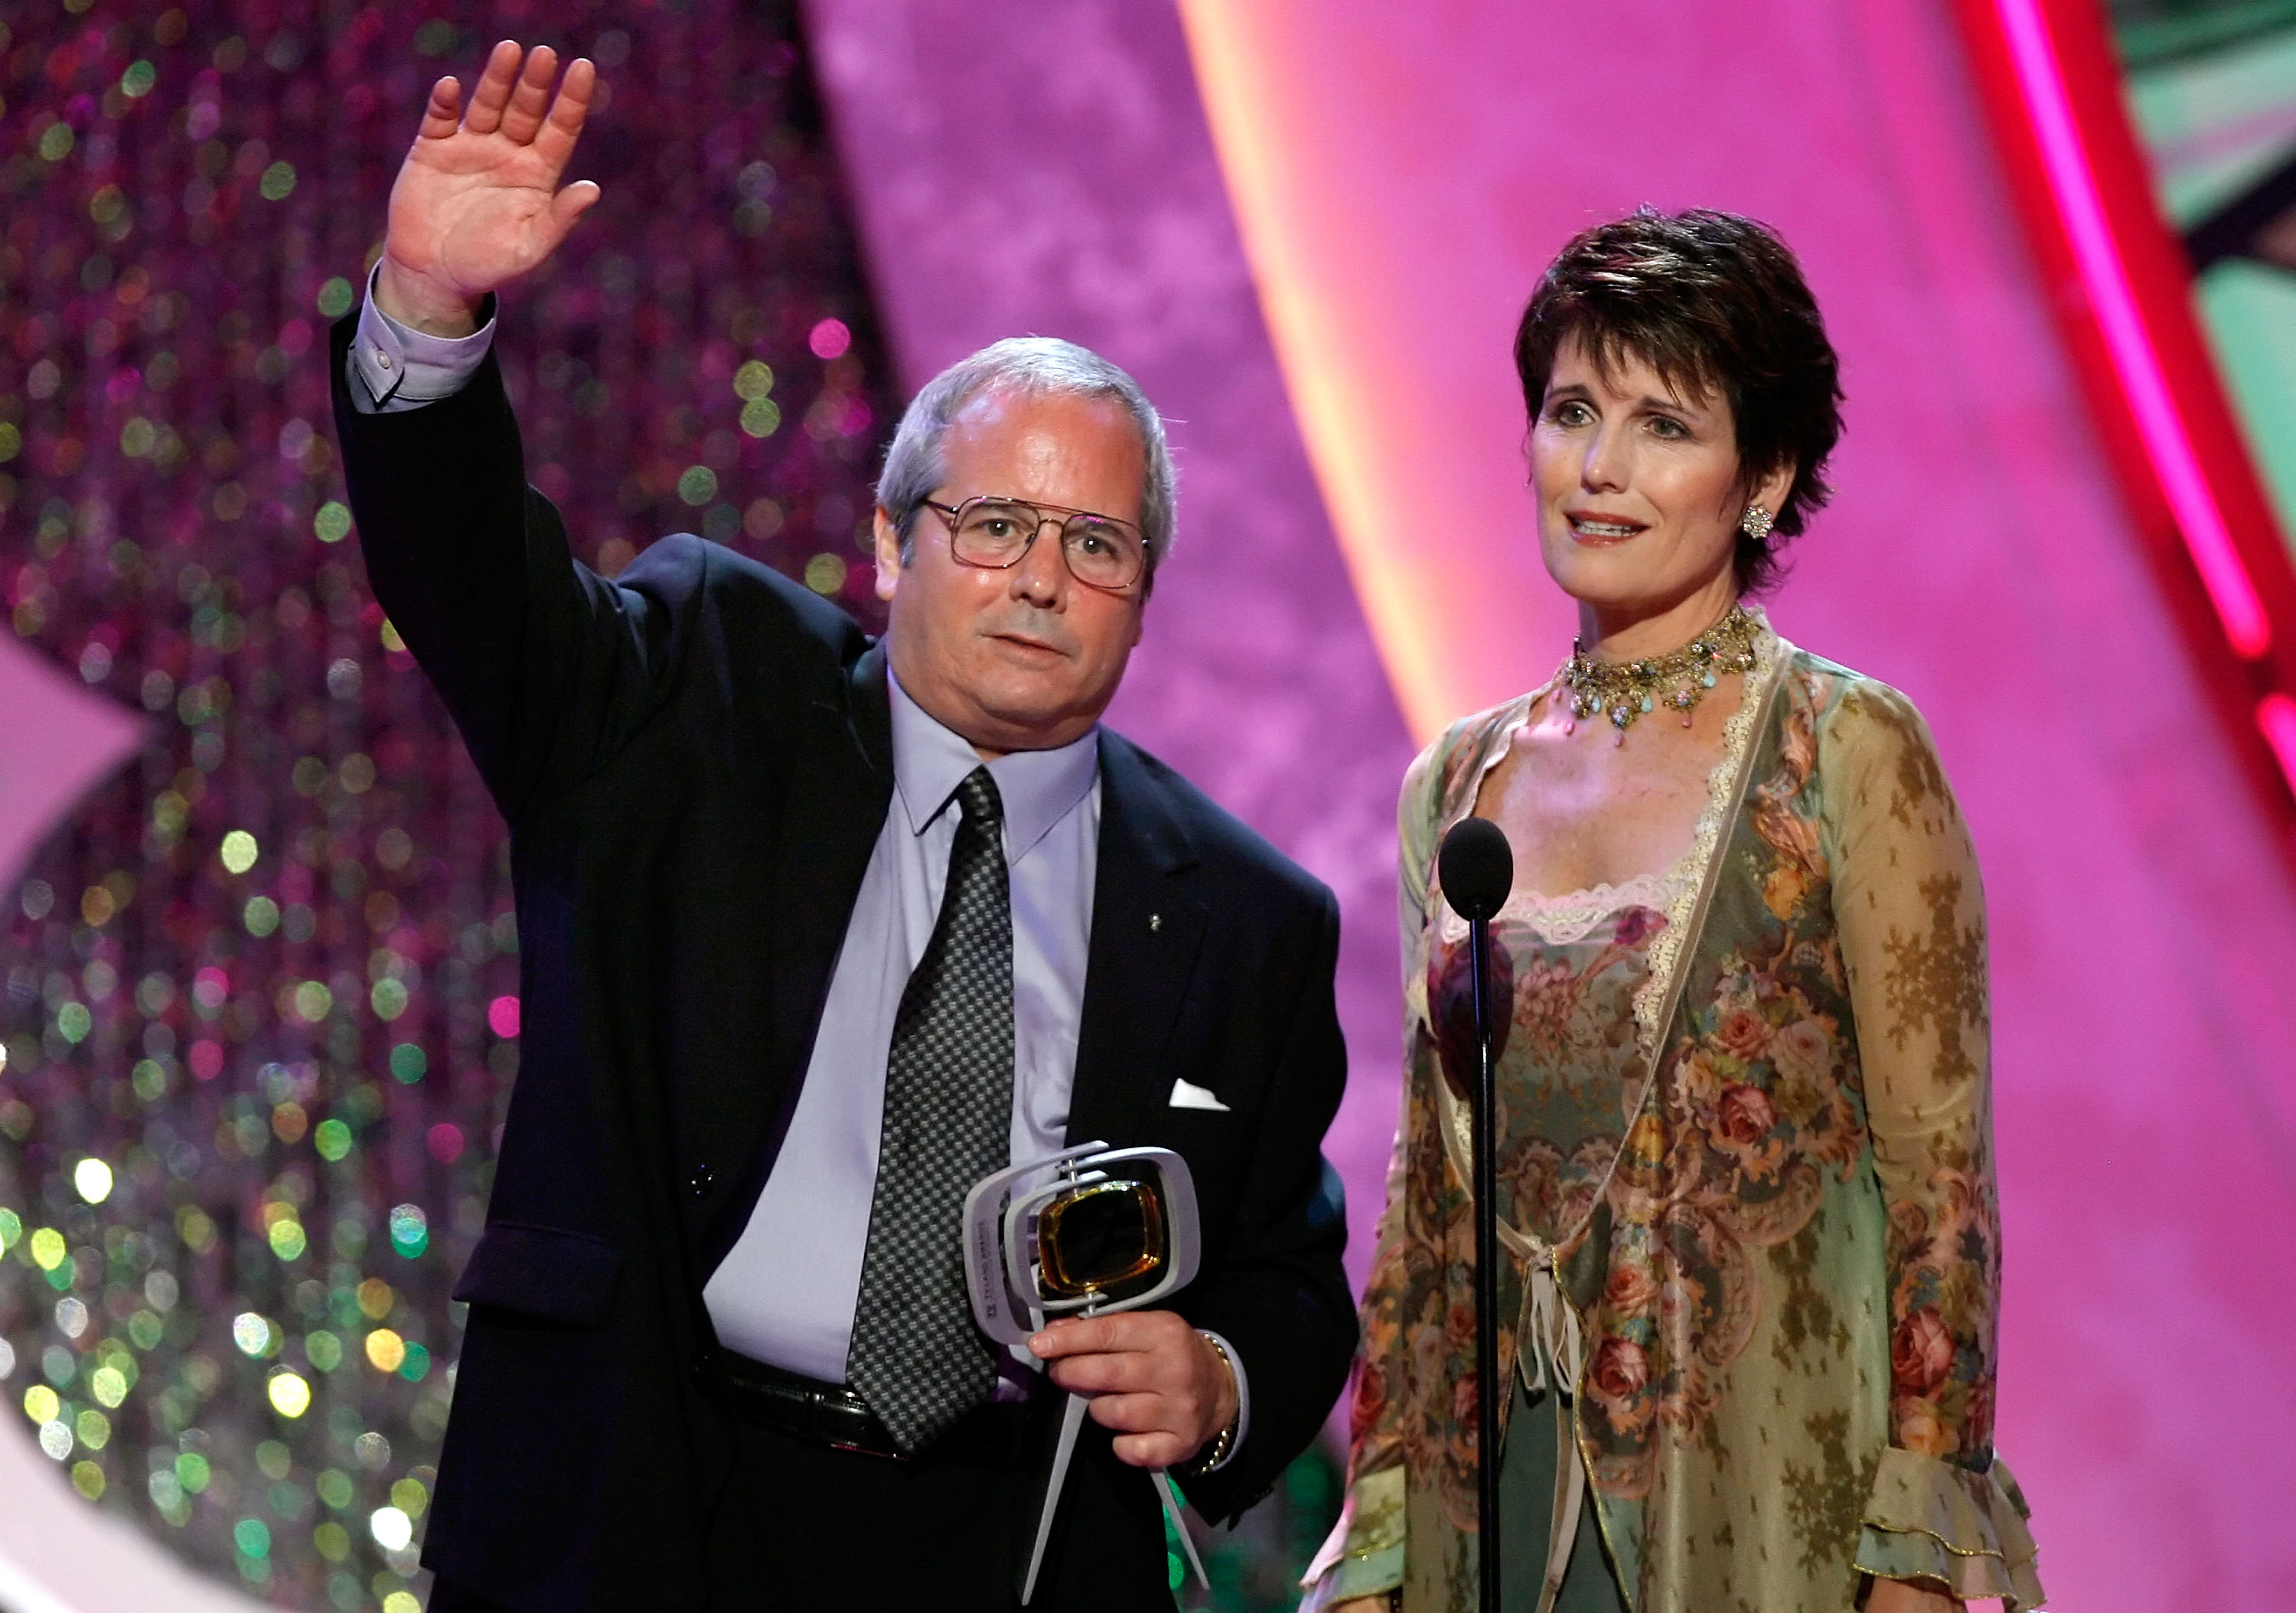 Desi Arnaz Jr. and Lucie Arnaz at the 5th Annual TV Land Awards at the Barker Hangar on April 14, 2007 in Santa Monica, California | Source: Getty Images